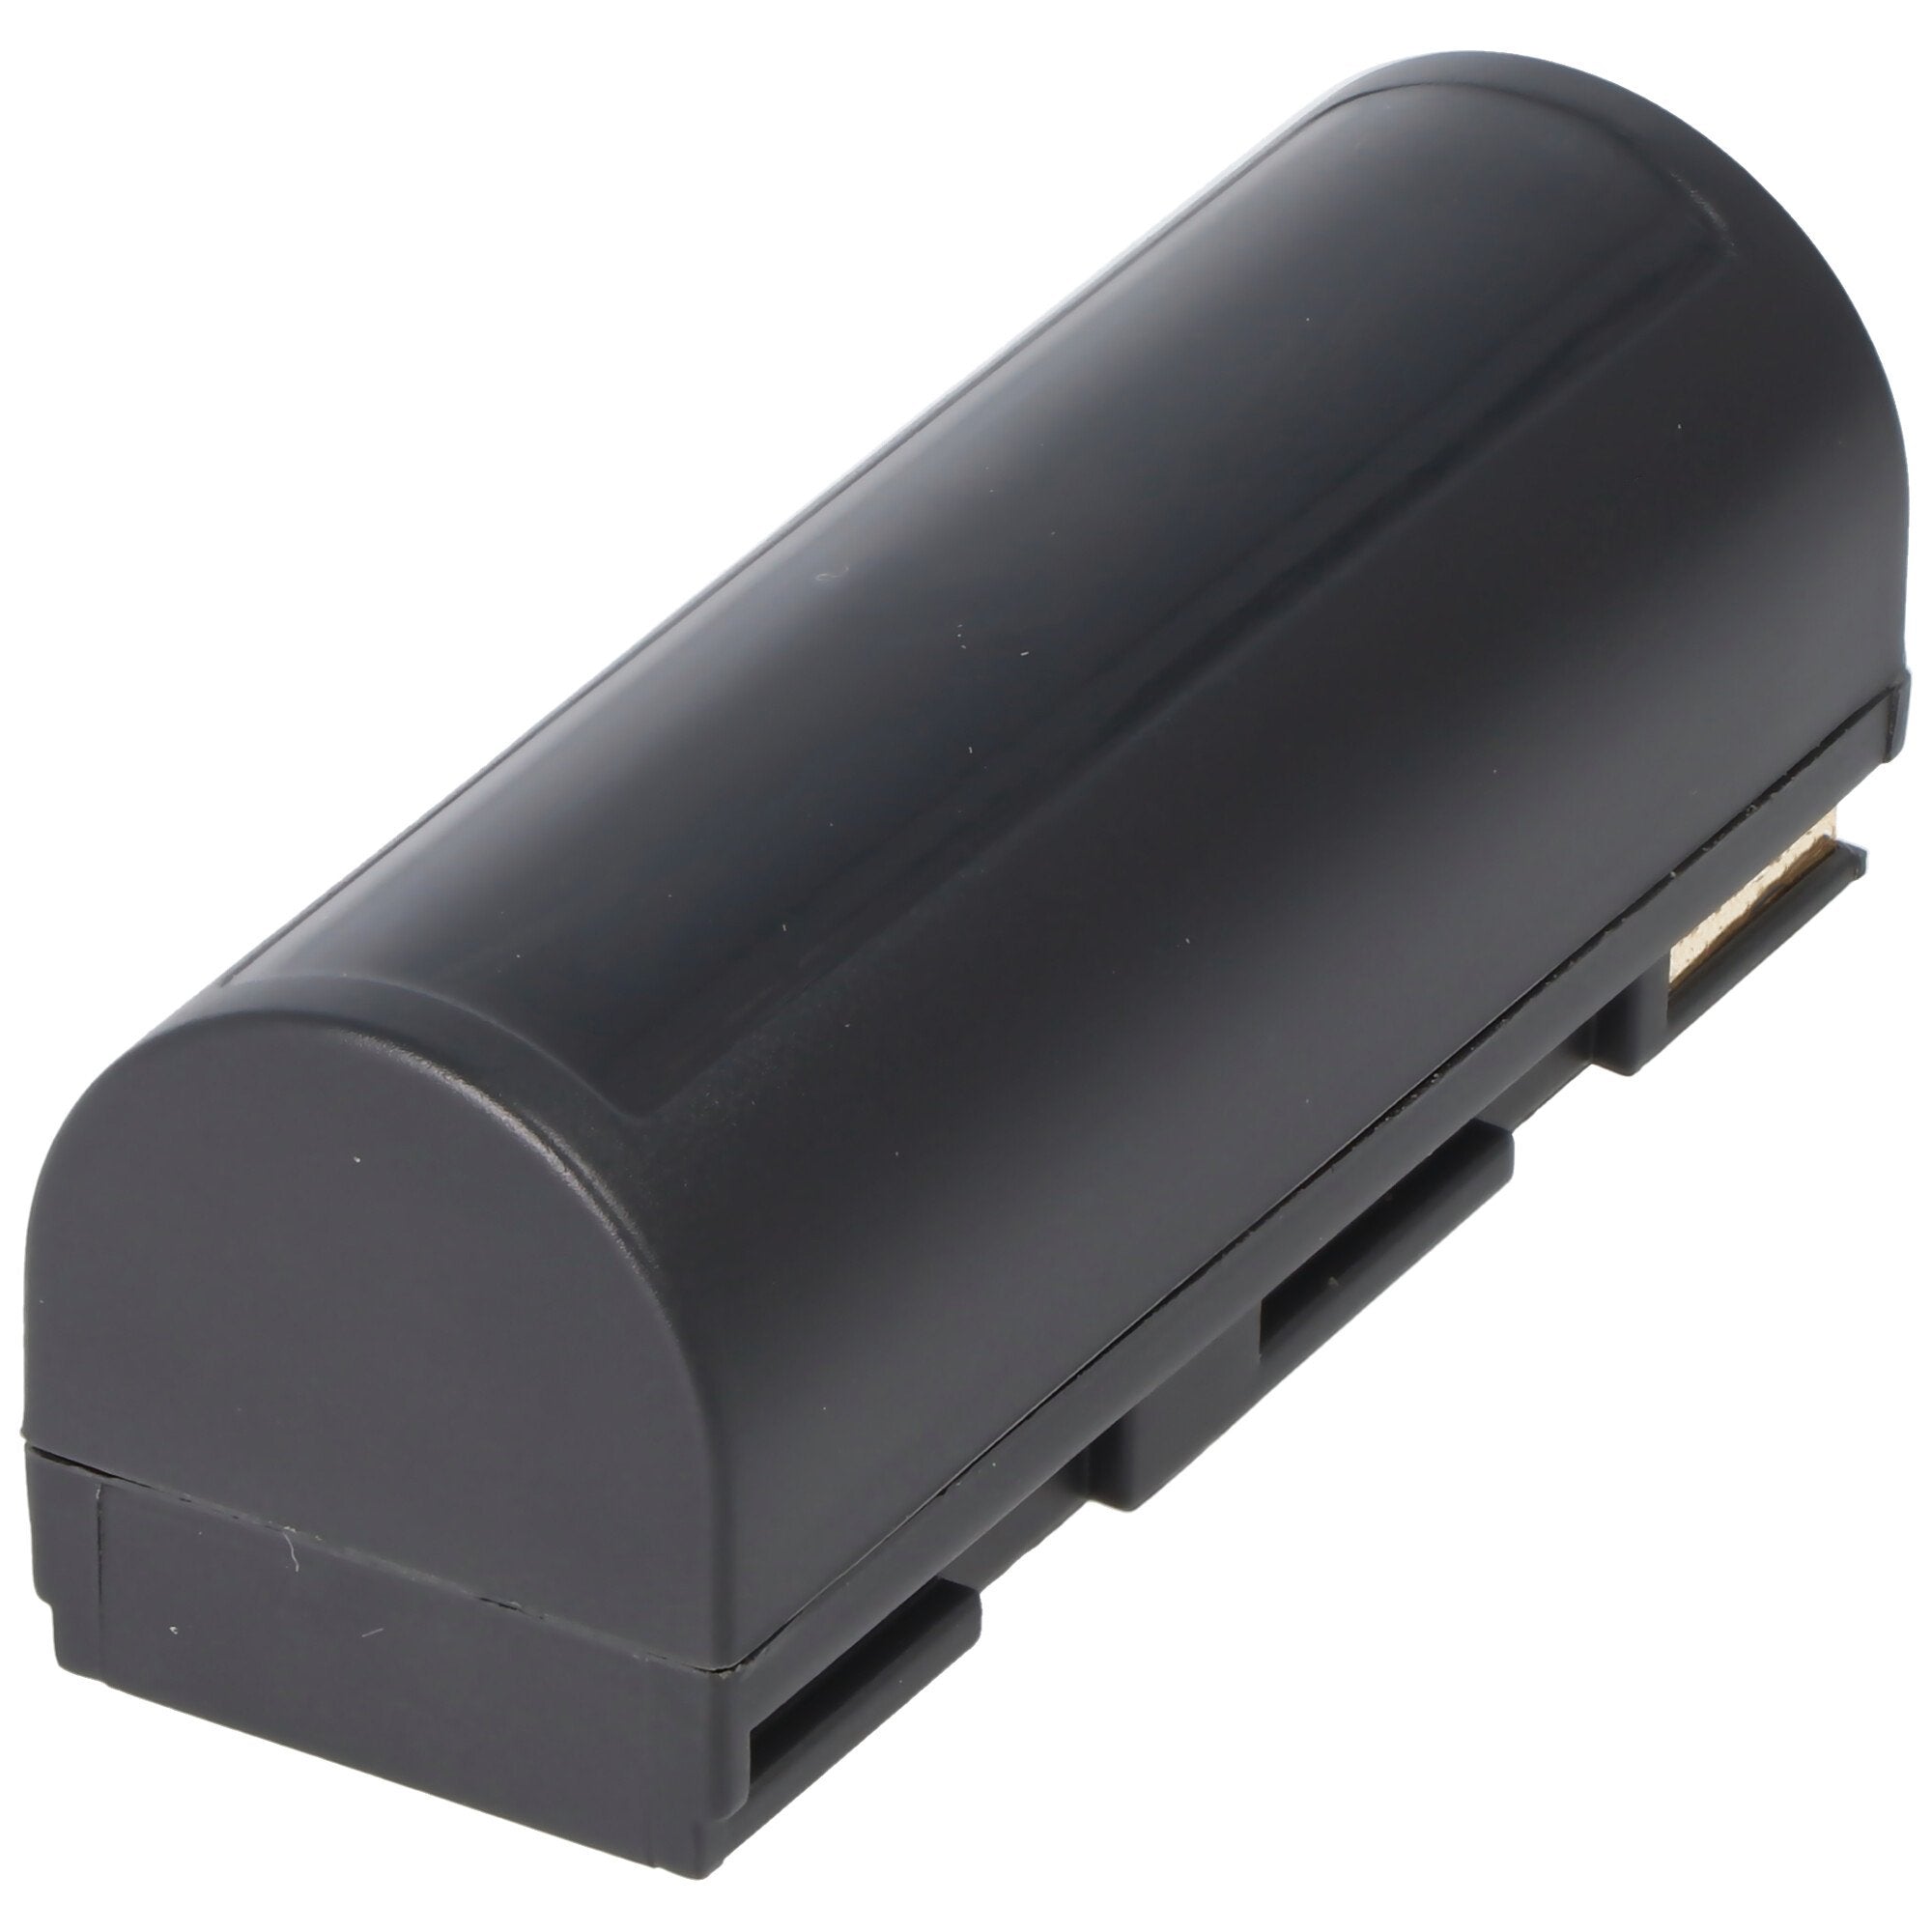 AccuCell battery suitable for Fuji NP-80, FinPix 1700z, 6900 Zoom